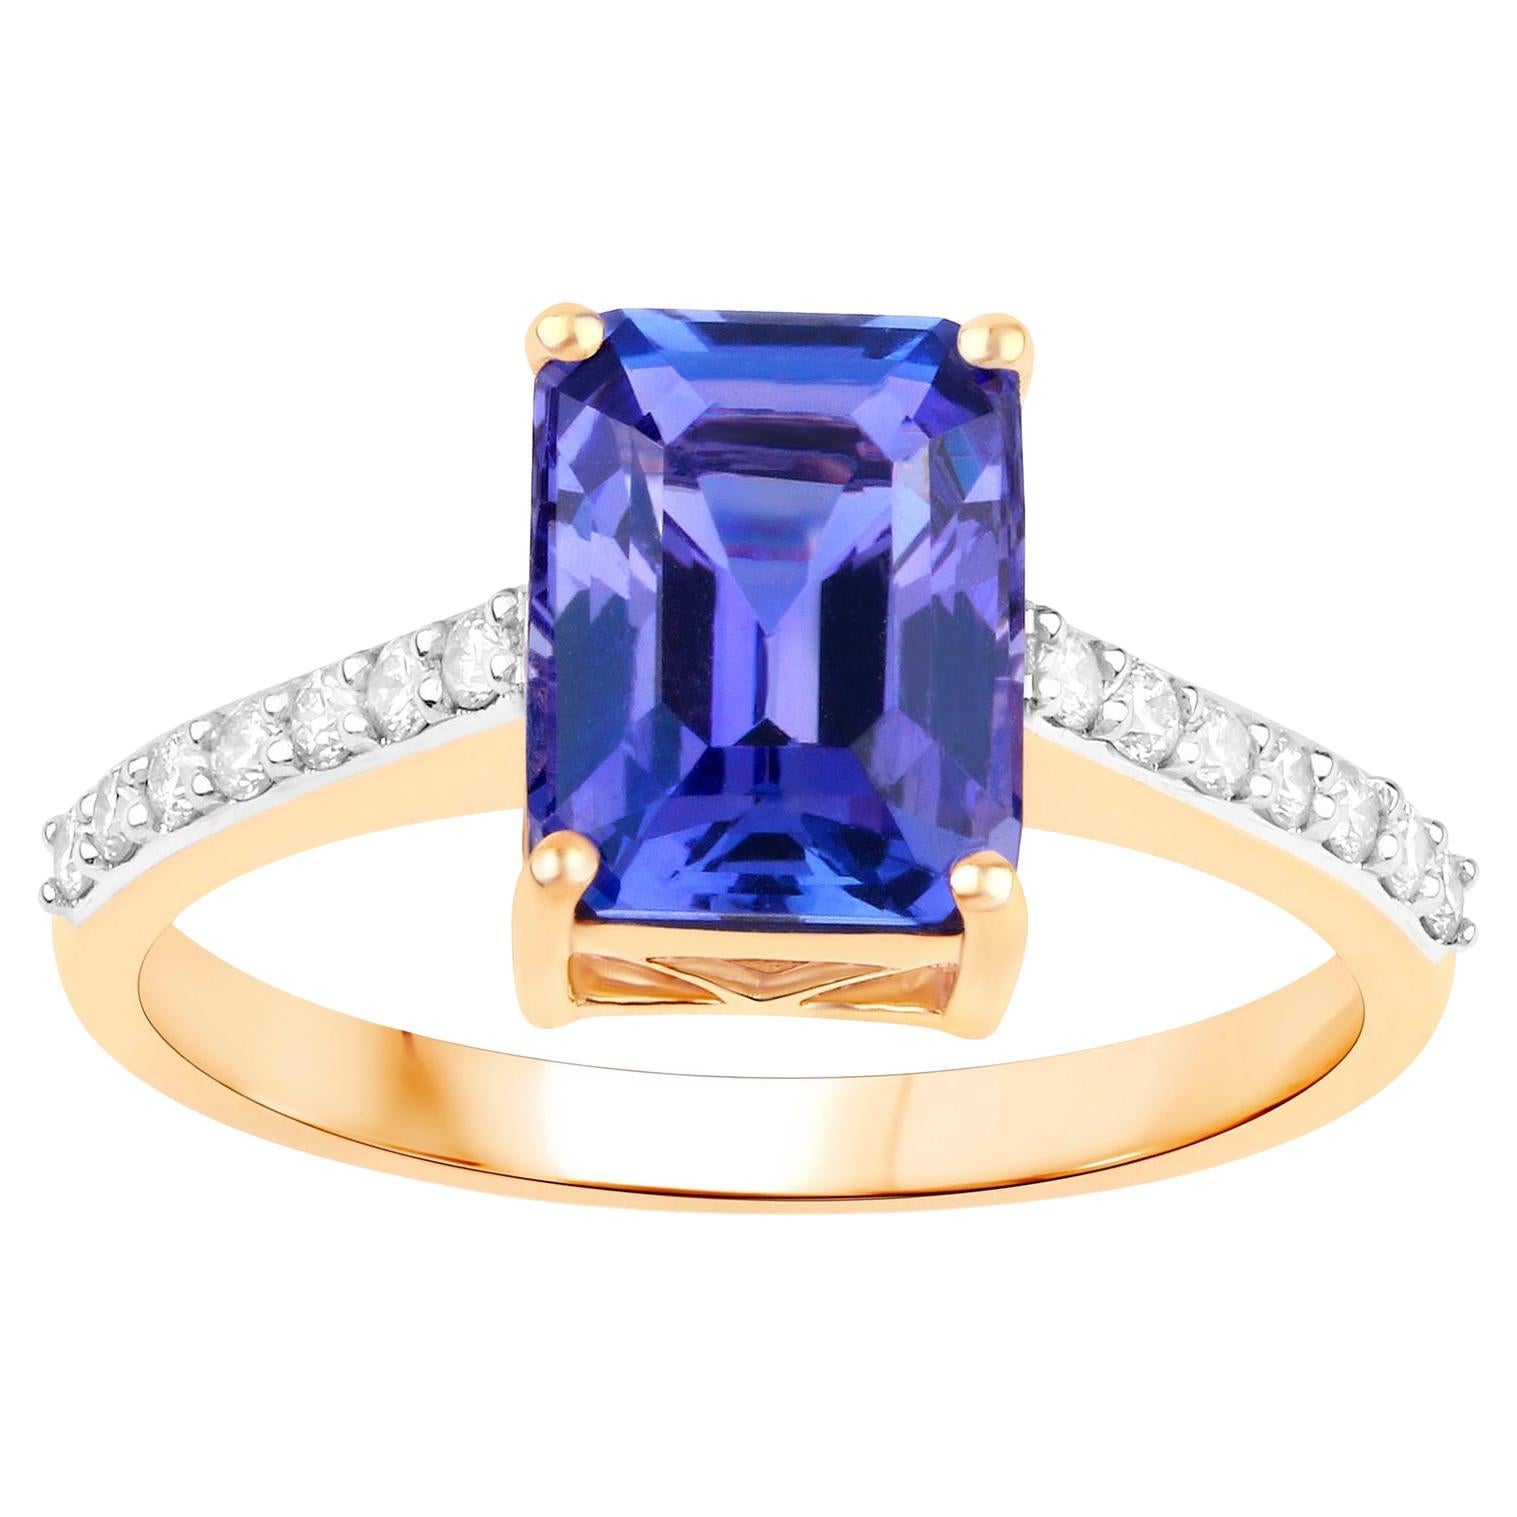 Tanzanite Ring With Diamonds 2.74 Carats 14K Yellow Gold For Sale